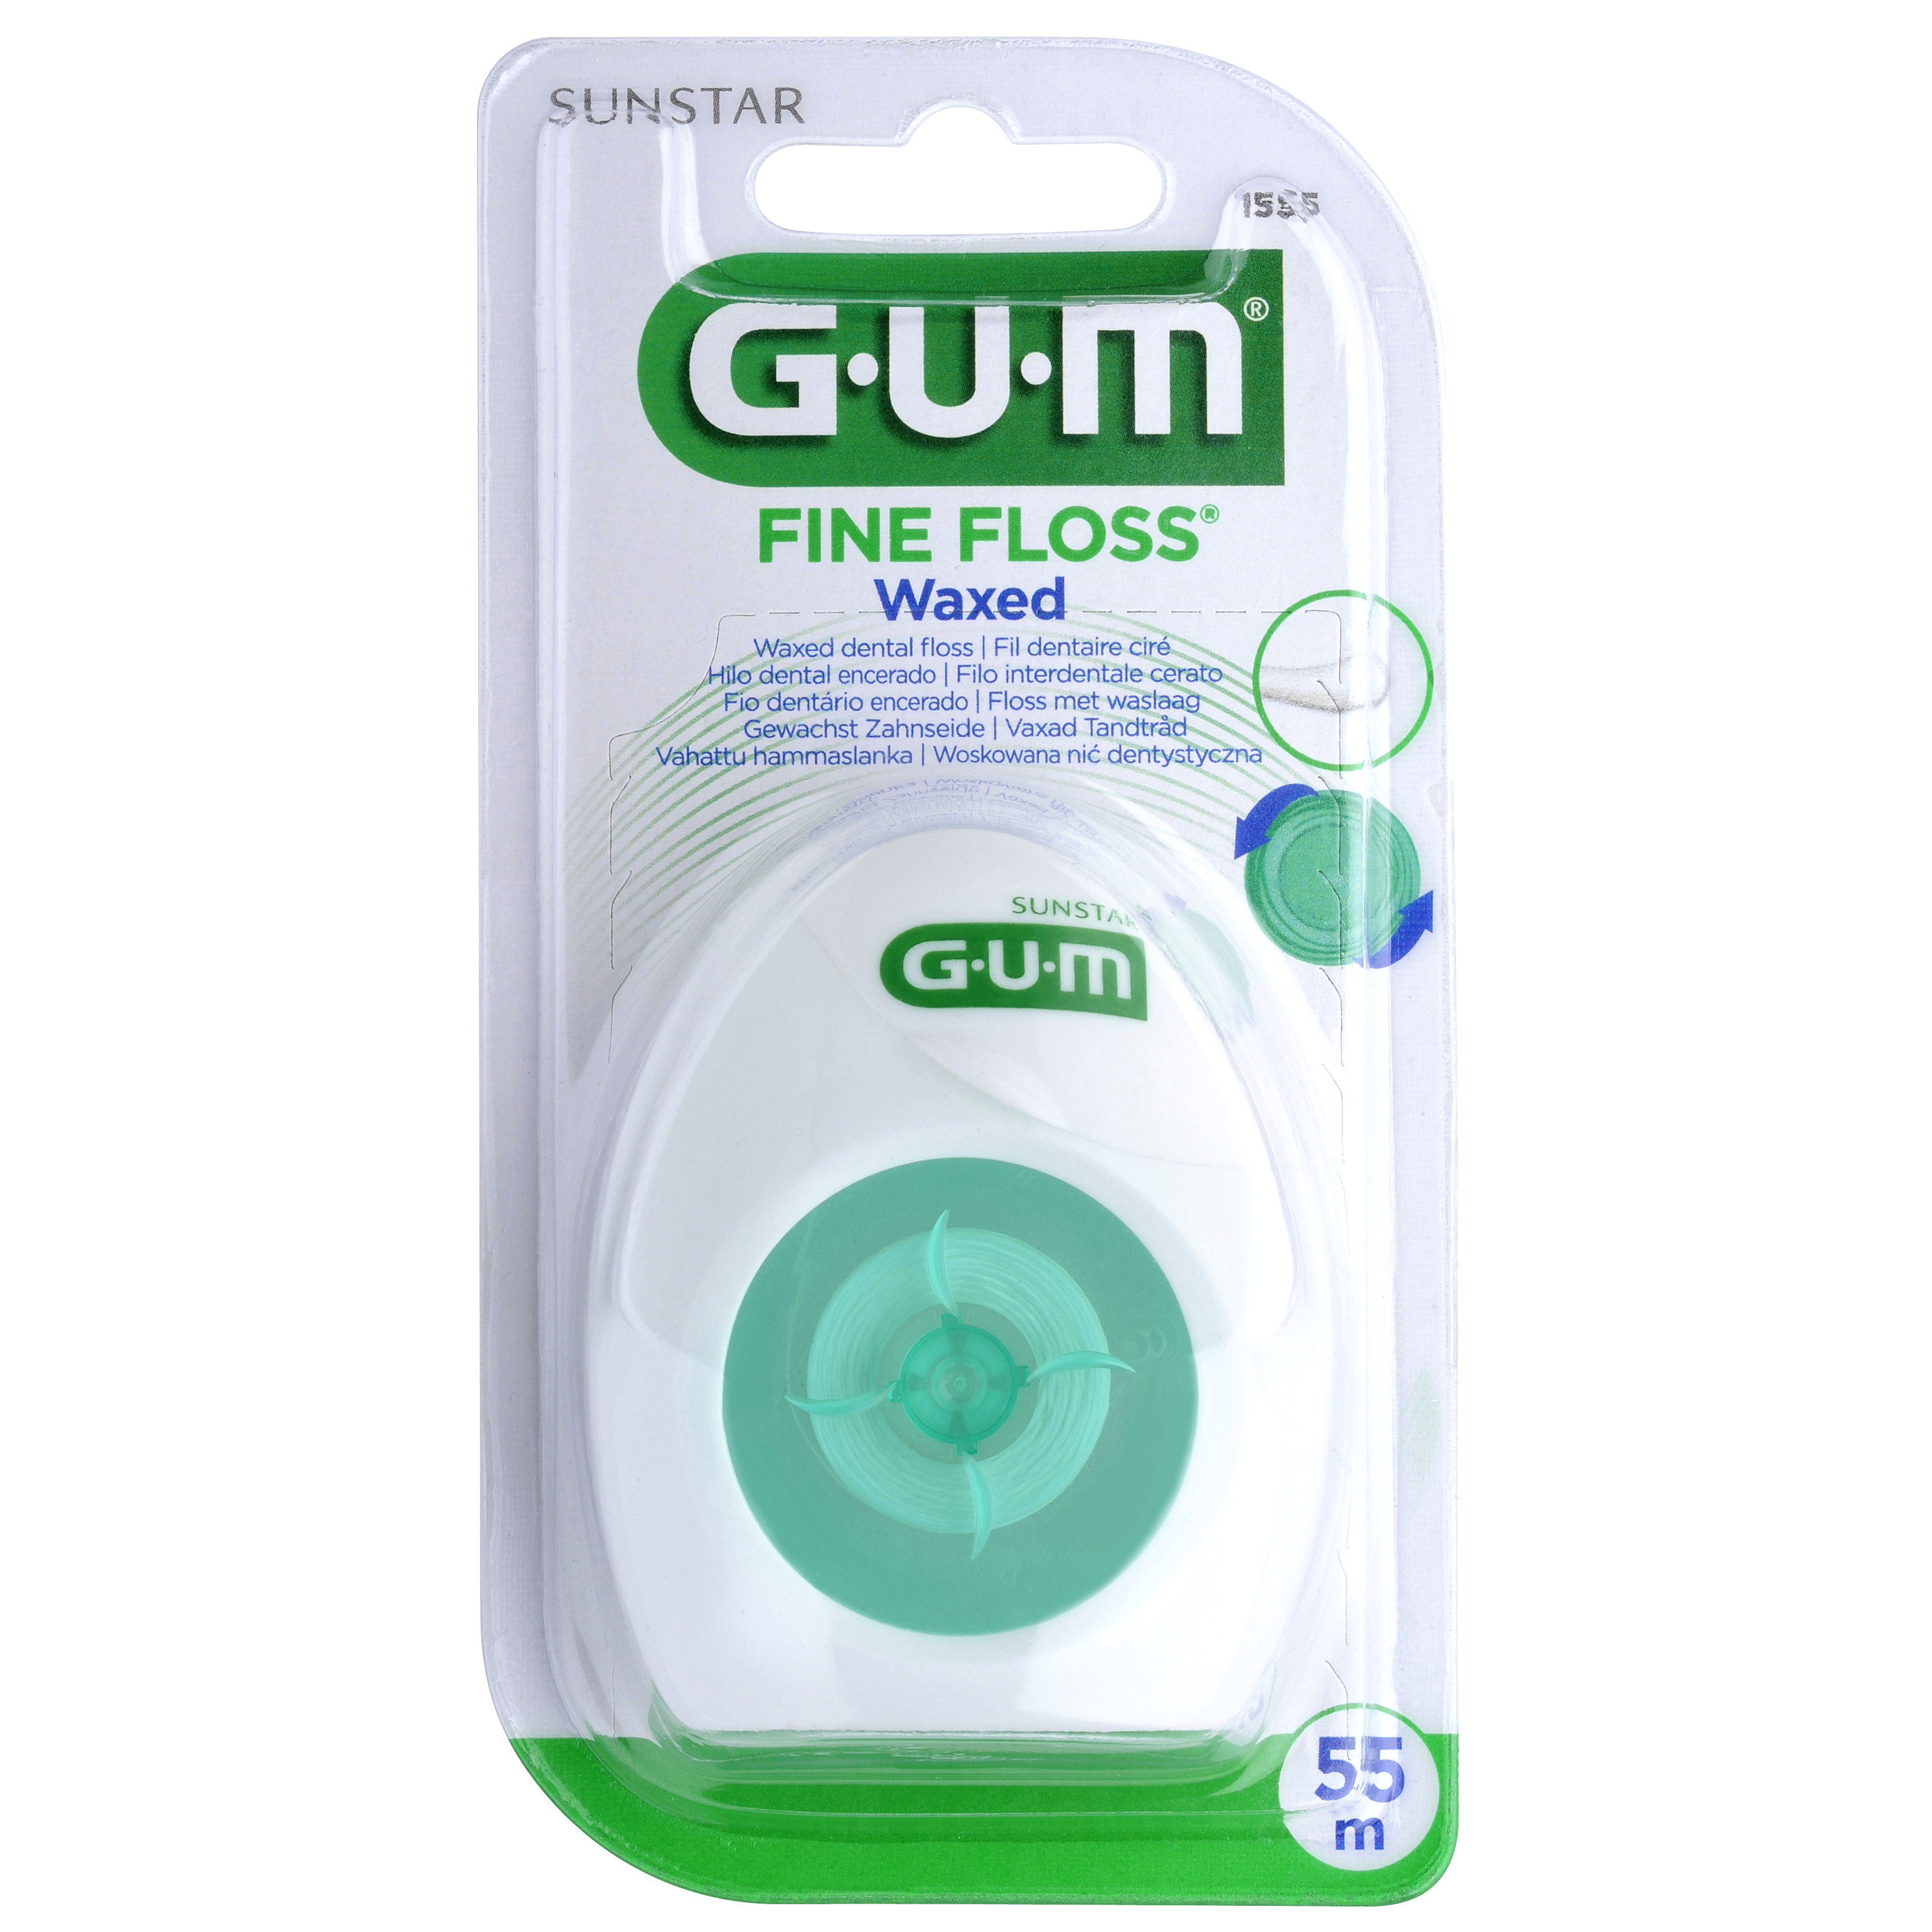 P1555-GUM-Fine-Floss-Waxed-Blister-Front.png